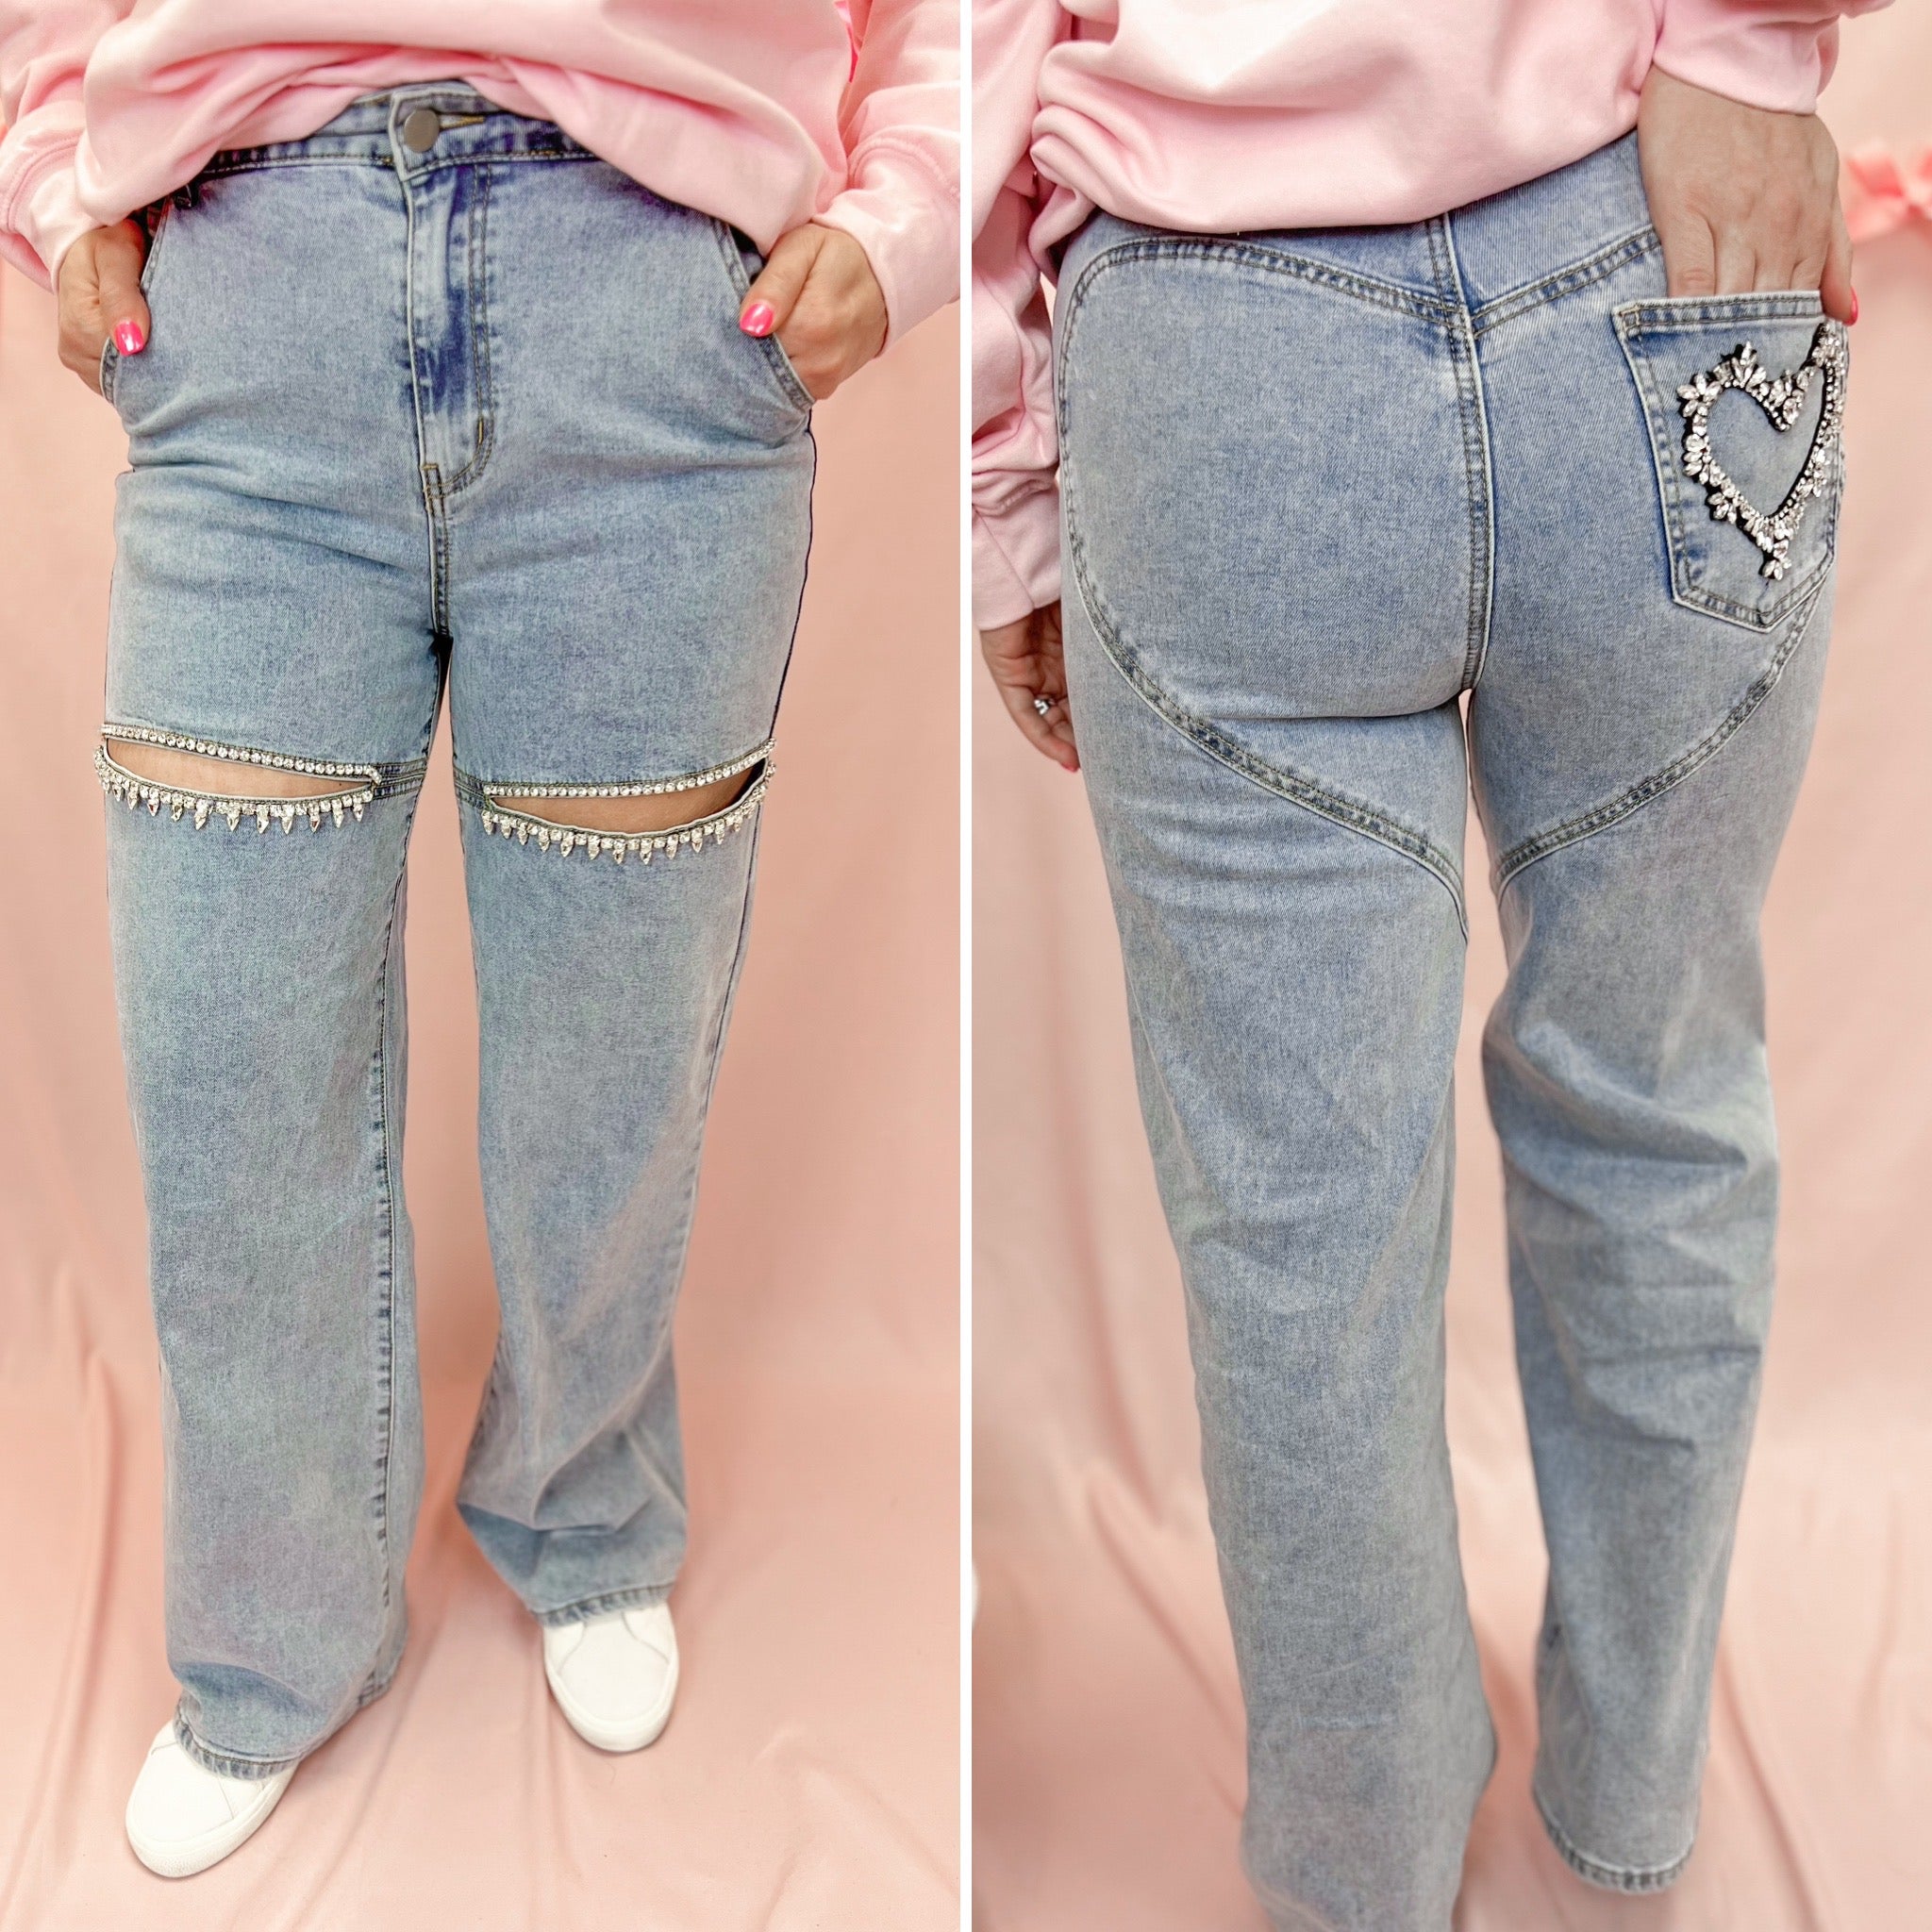 Our Heart First Straight Jeans-Jeans-The Lovely Closet-The Lovely Closet, Women's Fashion Boutique in Alexandria, KY